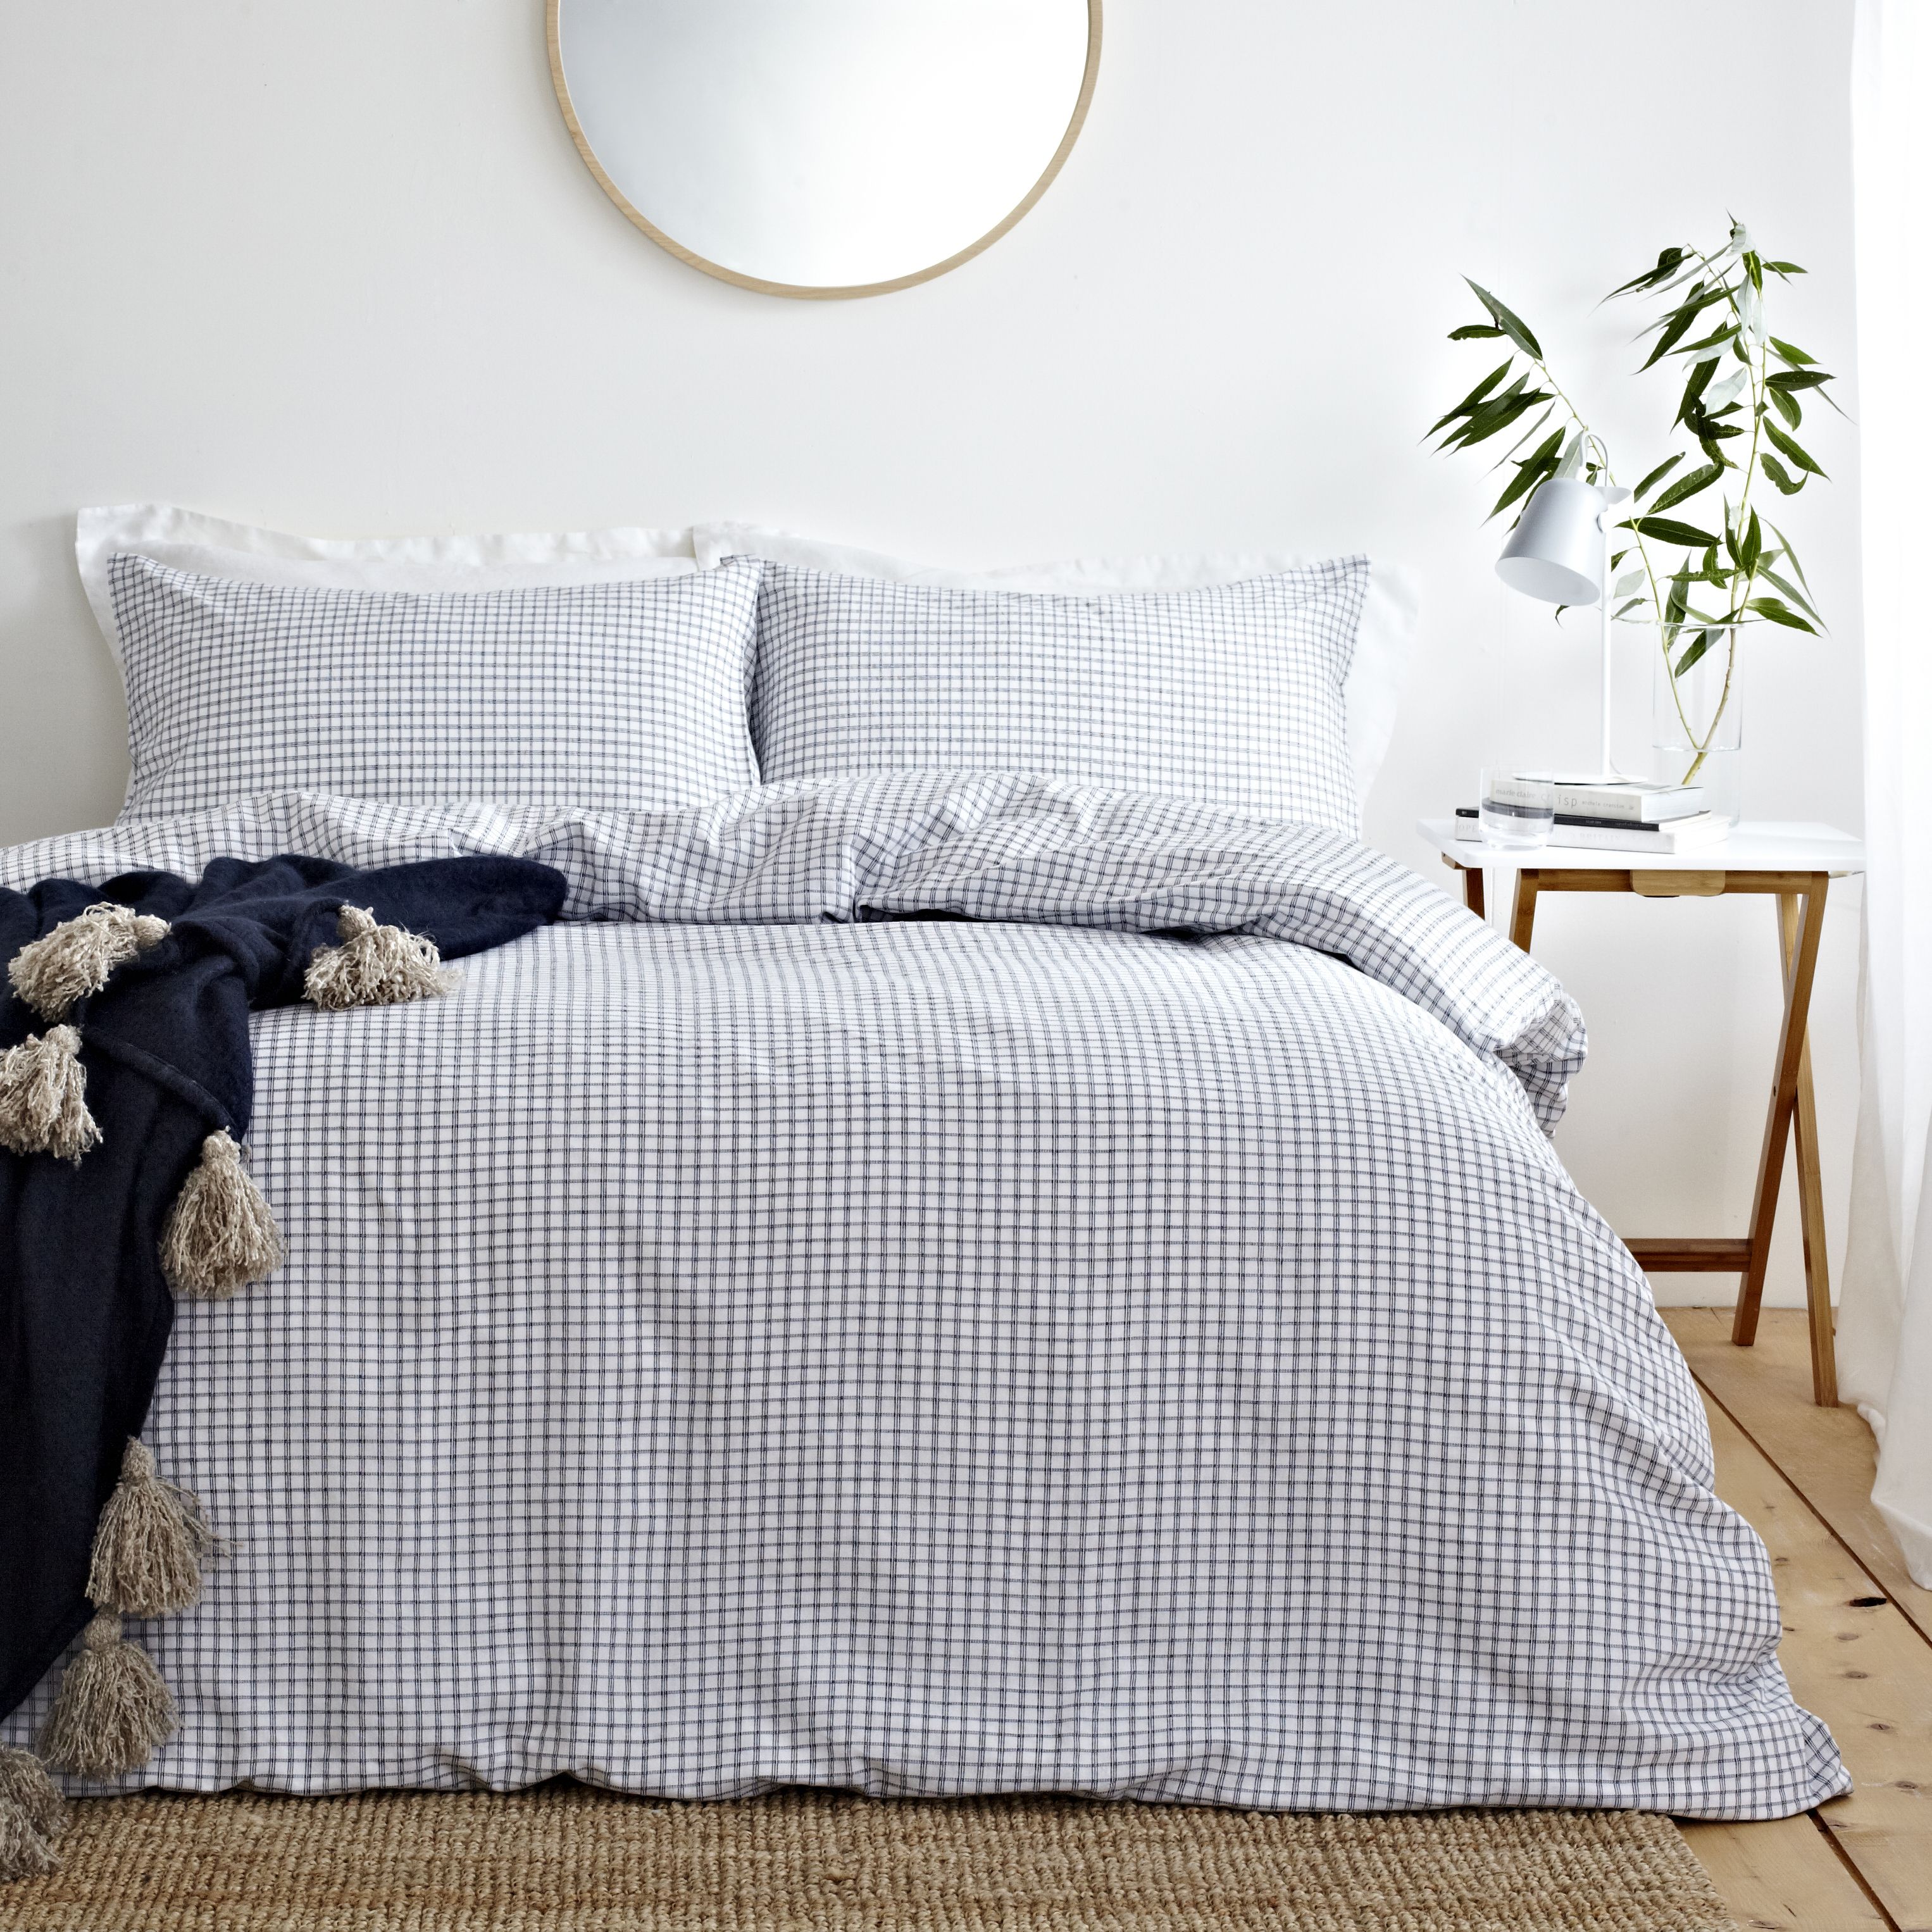 Invite some freshness into your bedroom décor with this modern, classic gingham style design. This duvet cover and pillow case set is perfect for creating a relaxed and easy living mood in your home. Perfecly light and airy for those summer months or warm and cosy for winter; this is the most versatile bedding you will ever own.